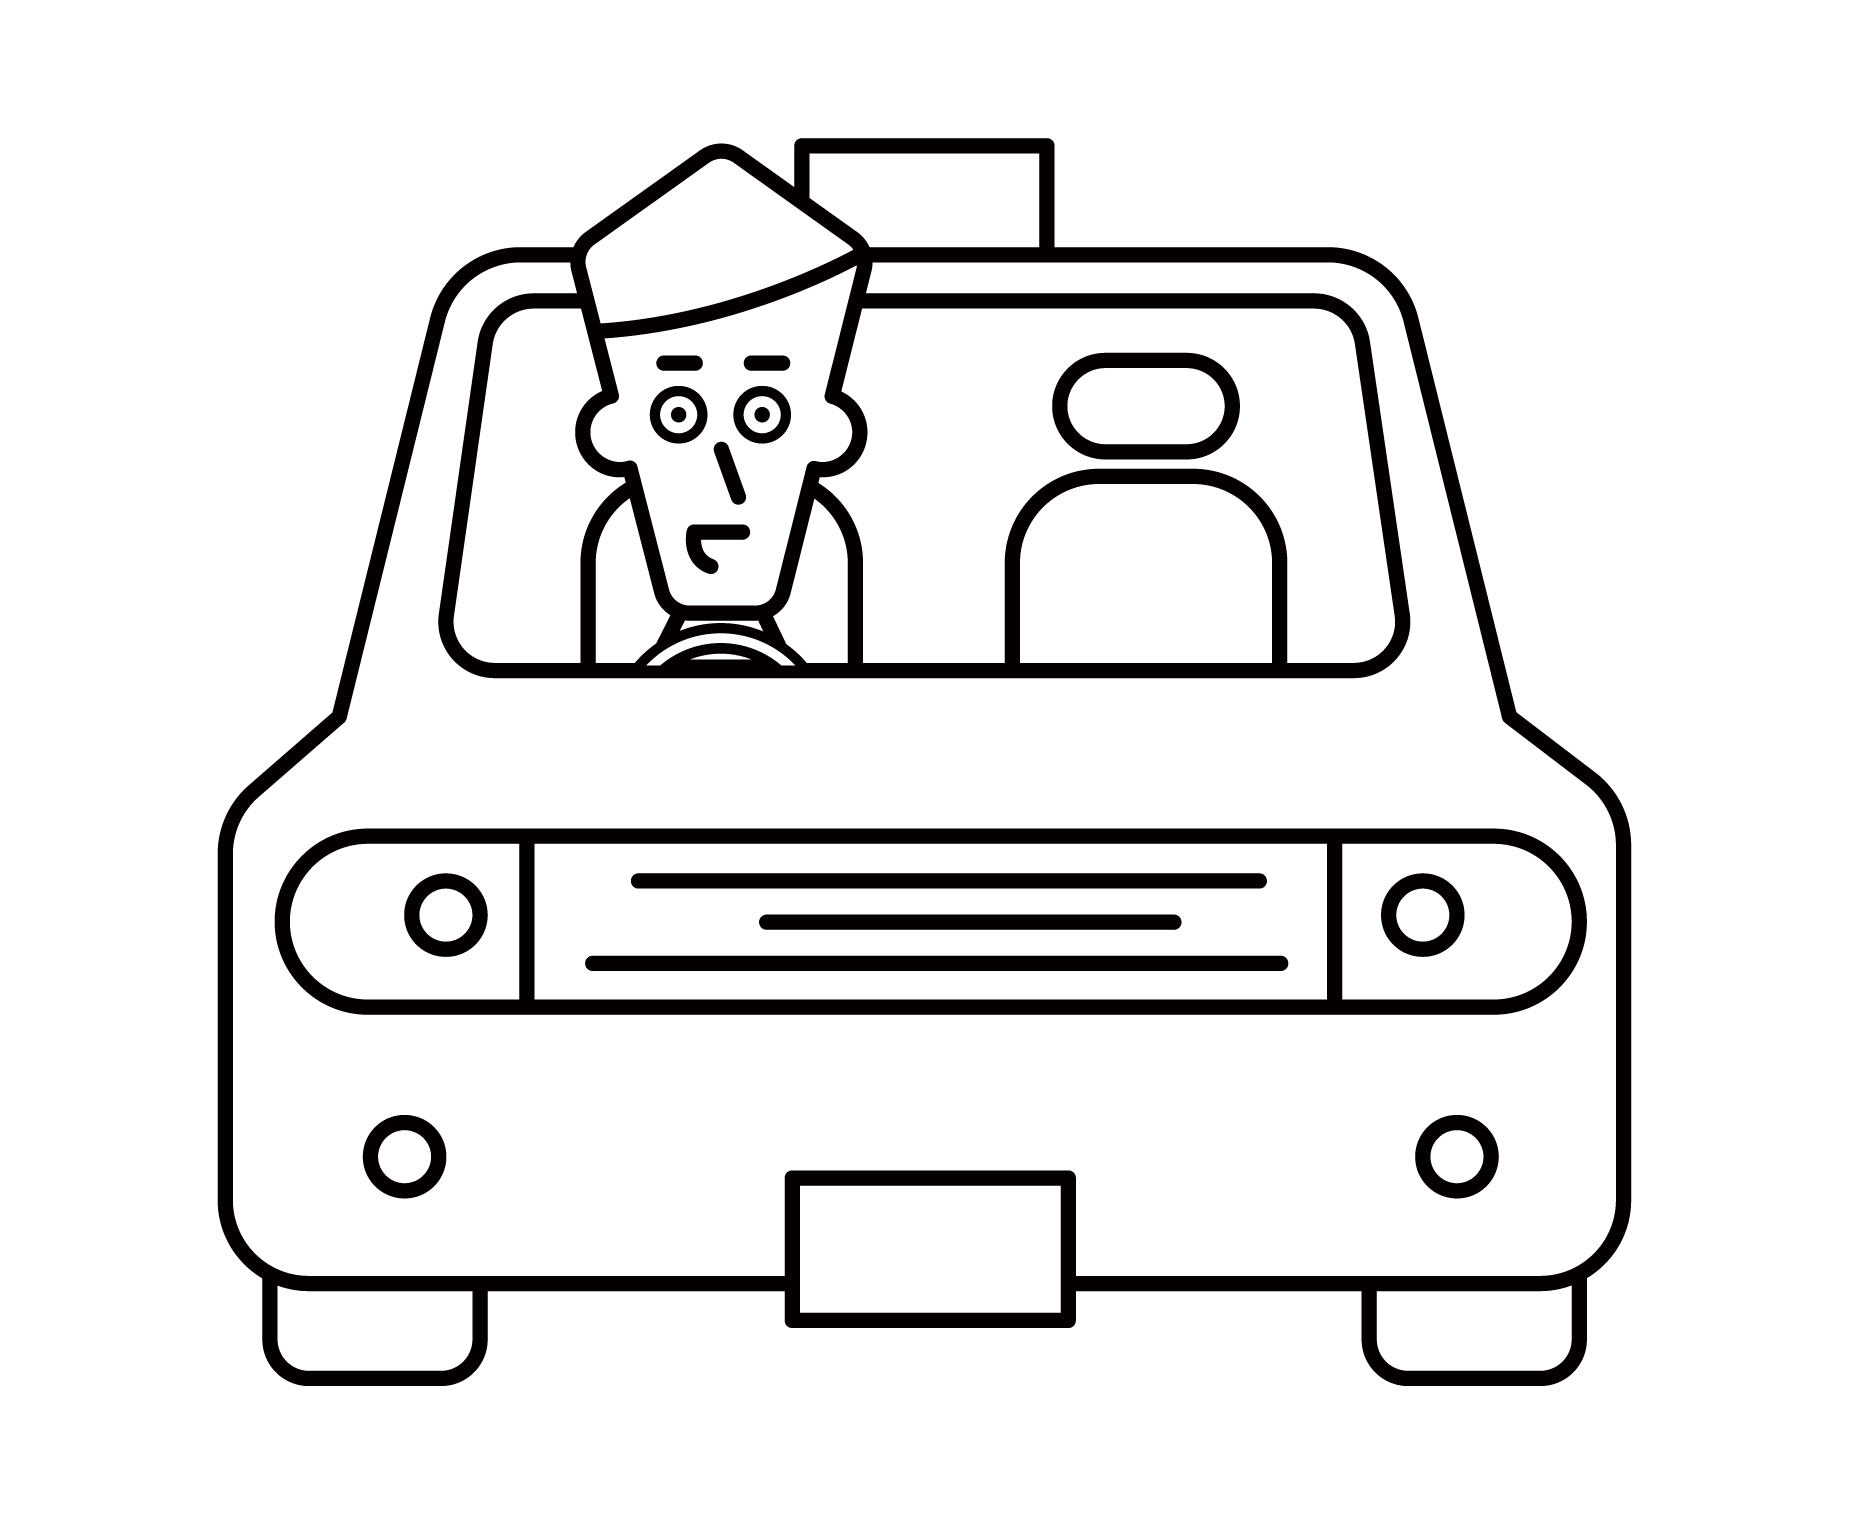 Illustration of a taxi driver (male)